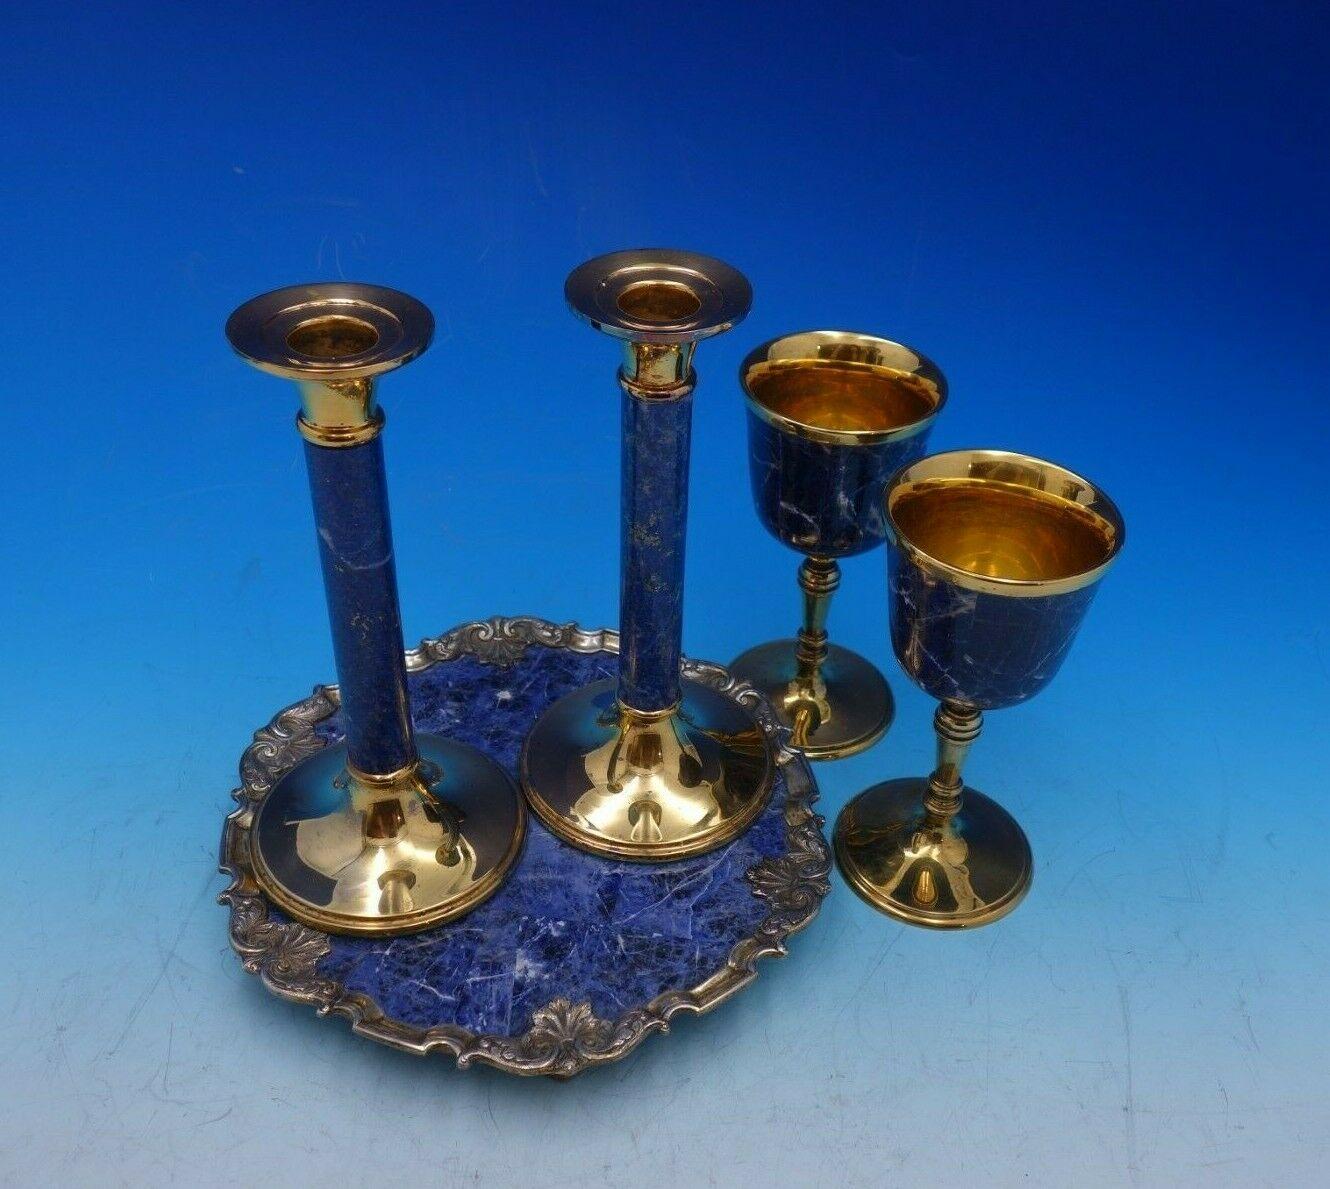 Garrard and Co.

Superb Garrard and Co. sterling silver five piece console set. This set includes:

2 - Wine glass: Gilt with sodalite (blue stone) in original box. Measures: 2